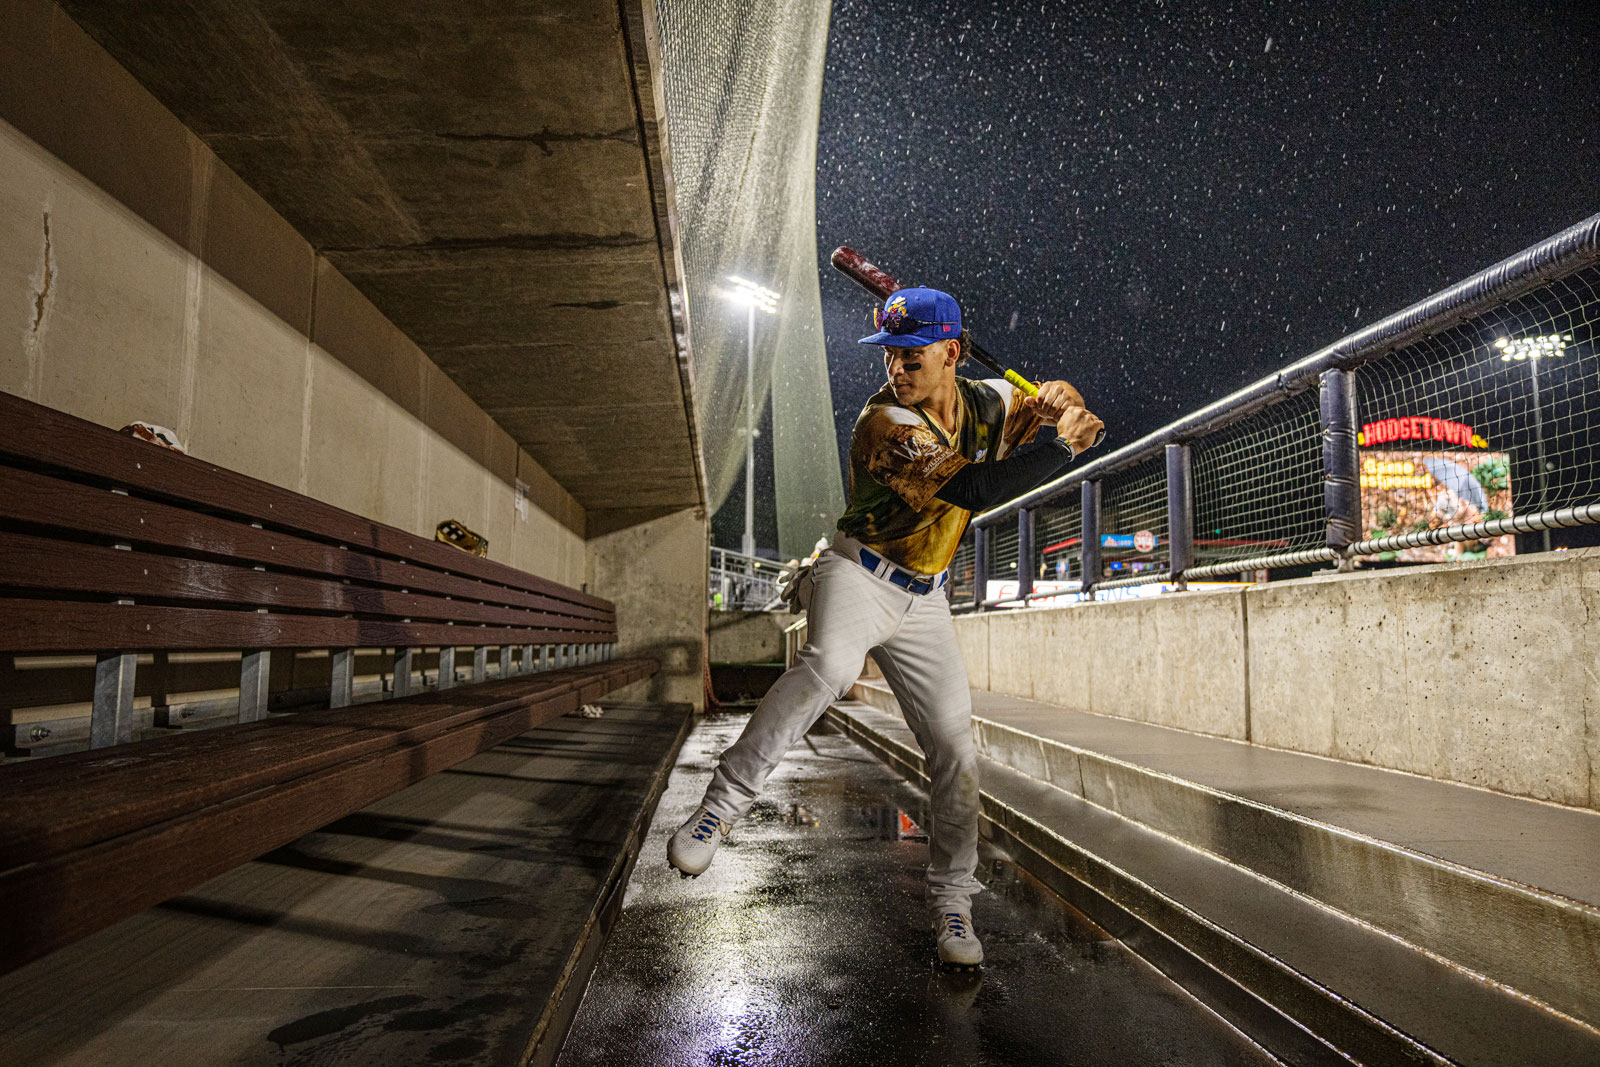 Alek Thomas of the Amarillo Sod Poodles in the dugout before the game against the San Antonio Mission at Hodgetown Stadium on July 31, 2021 in Amarillo, Texas. The was postponed do to rain